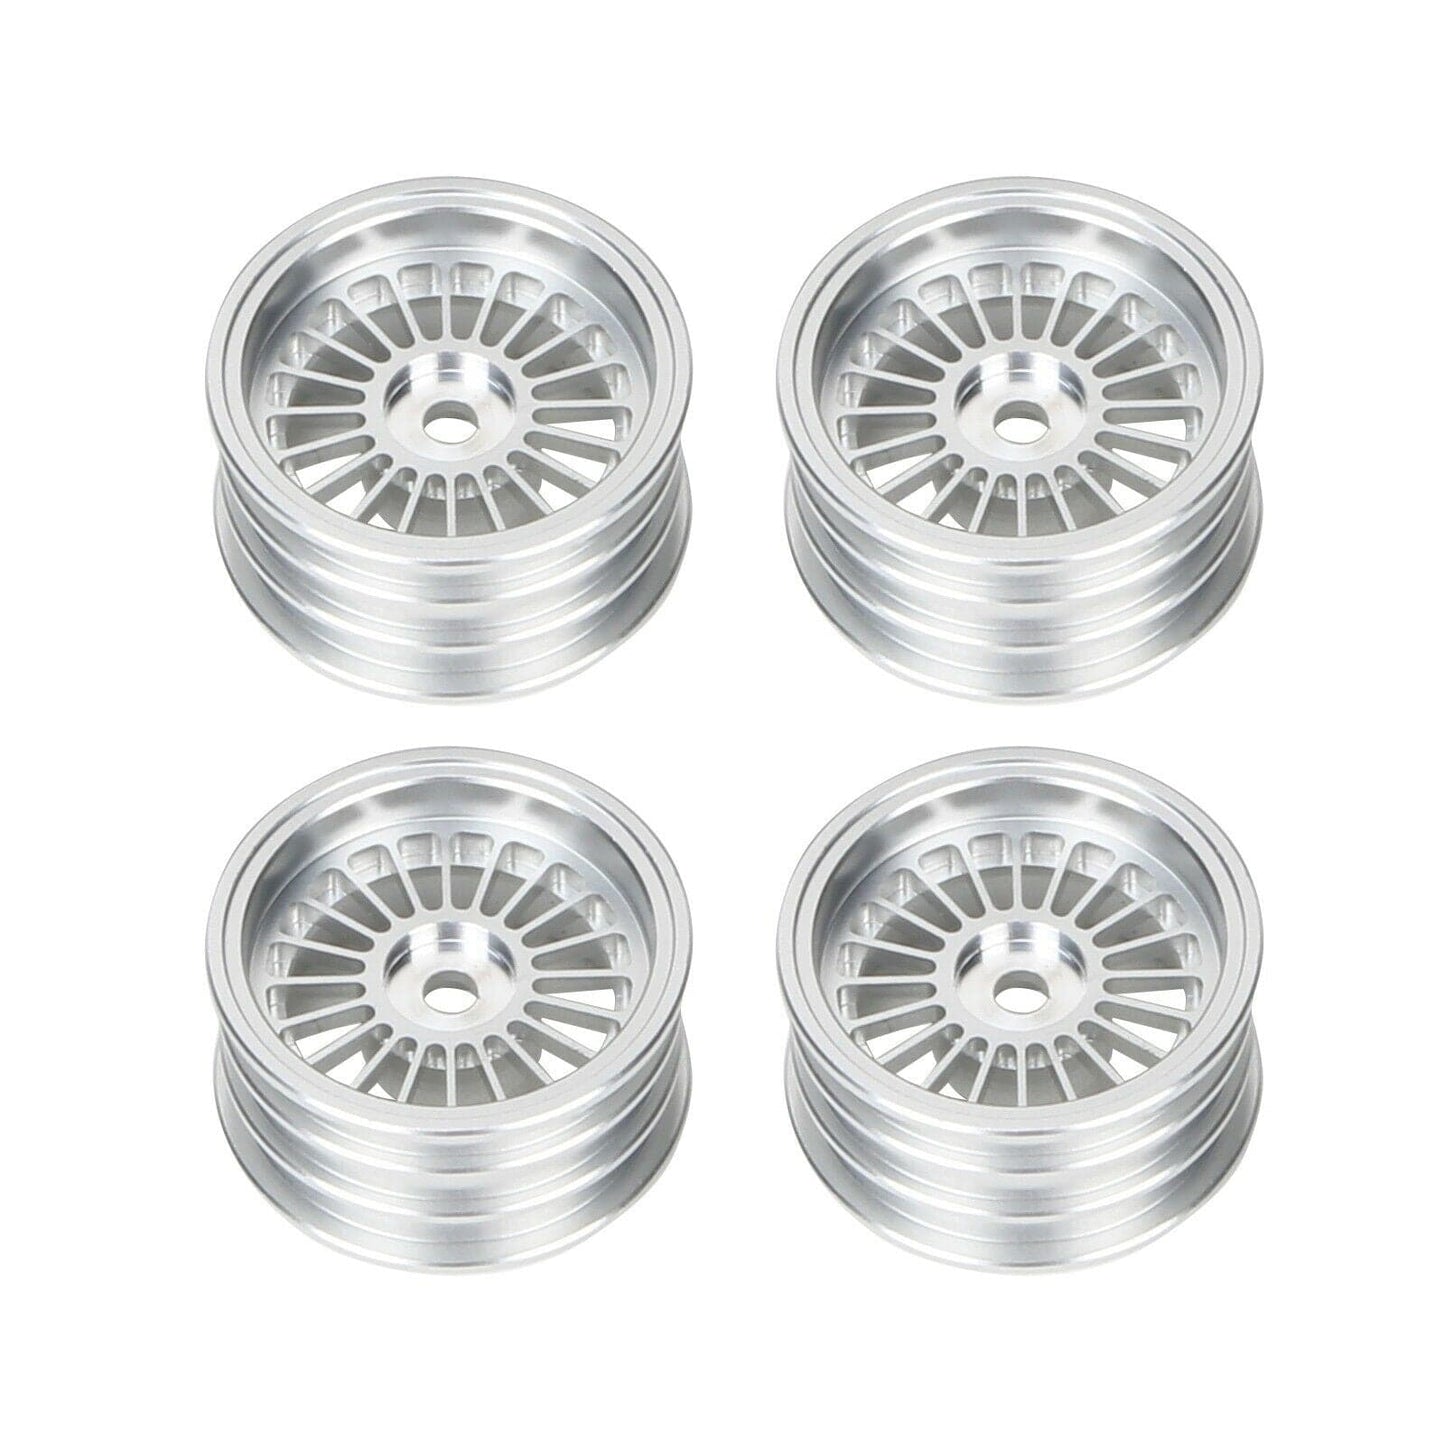 RCAWD AXIAL UPGRADE PARTS Silver RCAWD Metal Wheel for Axial SCX24 Crawlers AXI90081 AXI00001 AXI00002